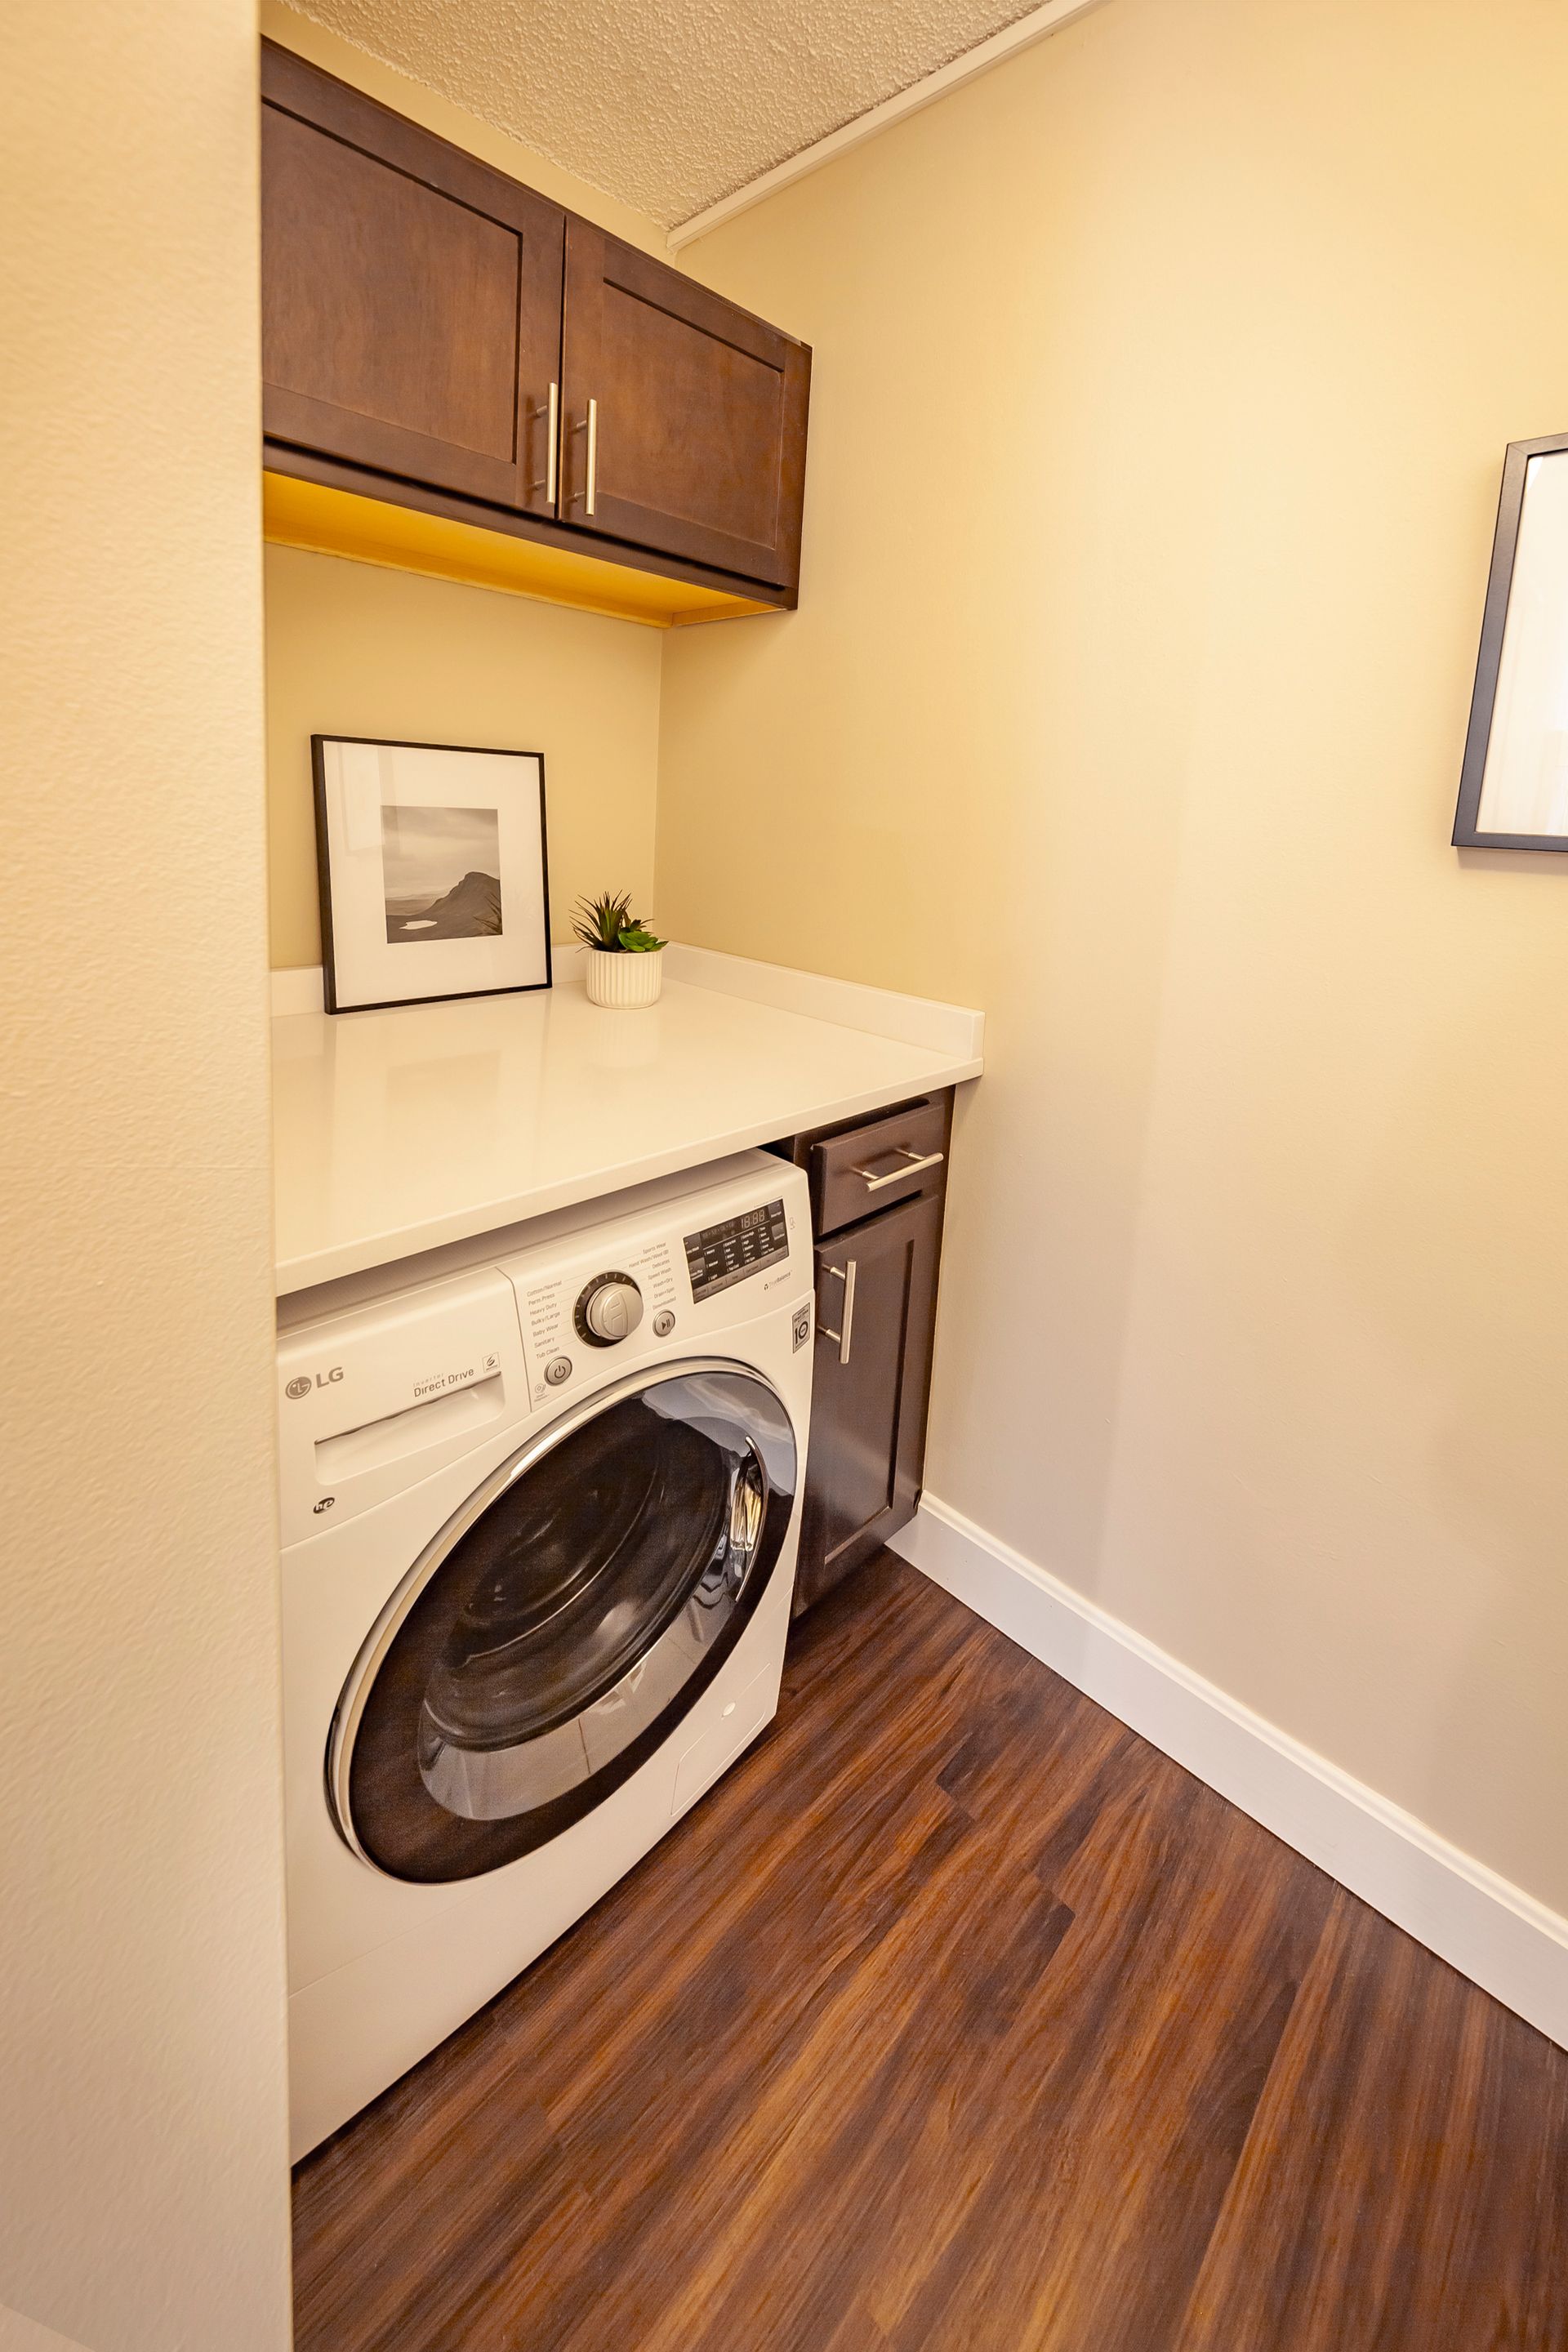 A laundry room with a washer and dryer and wooden floors at  Riley Towers, Indianapolis, IN. 